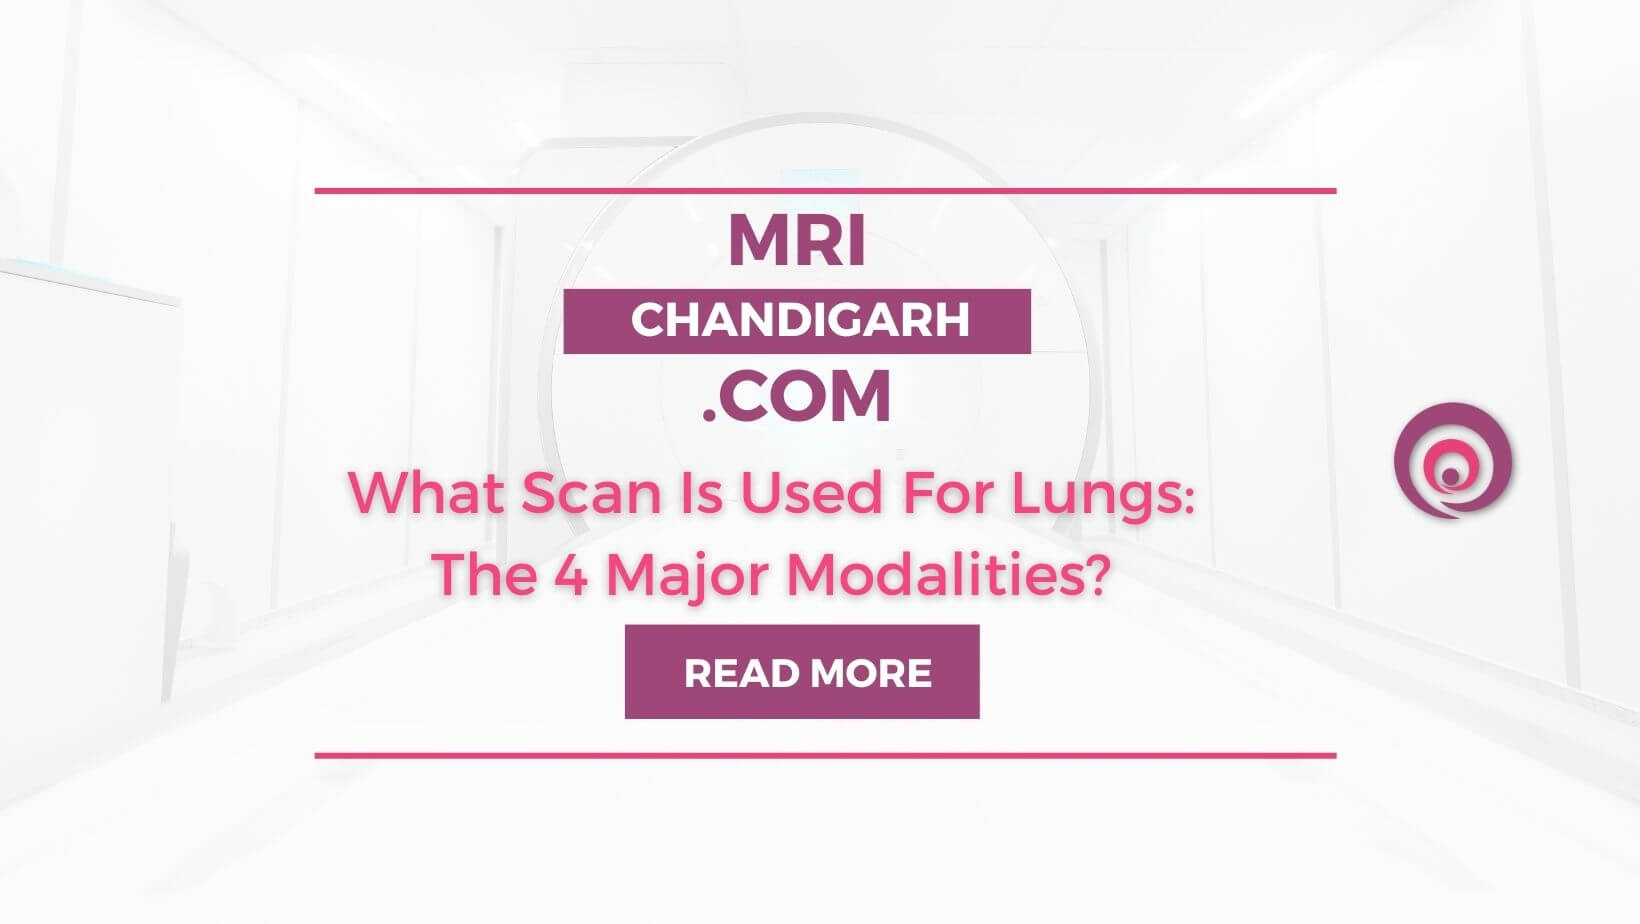 What Scan Is Used For Lungs: The 4 Major Modalities?